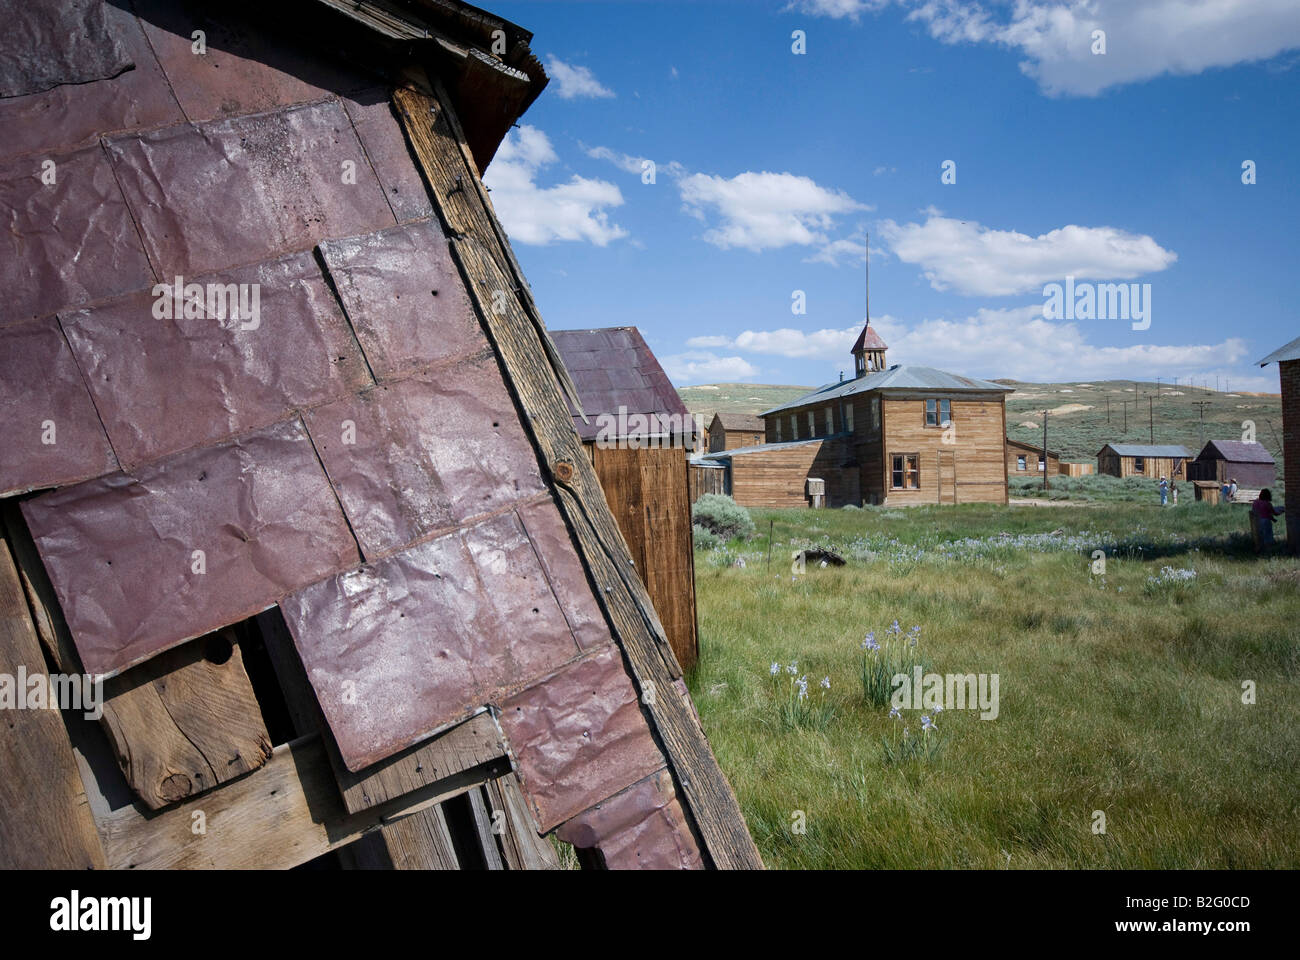 Toppled outhouse in the ghost town Bodie, California, USA. Stock Photo